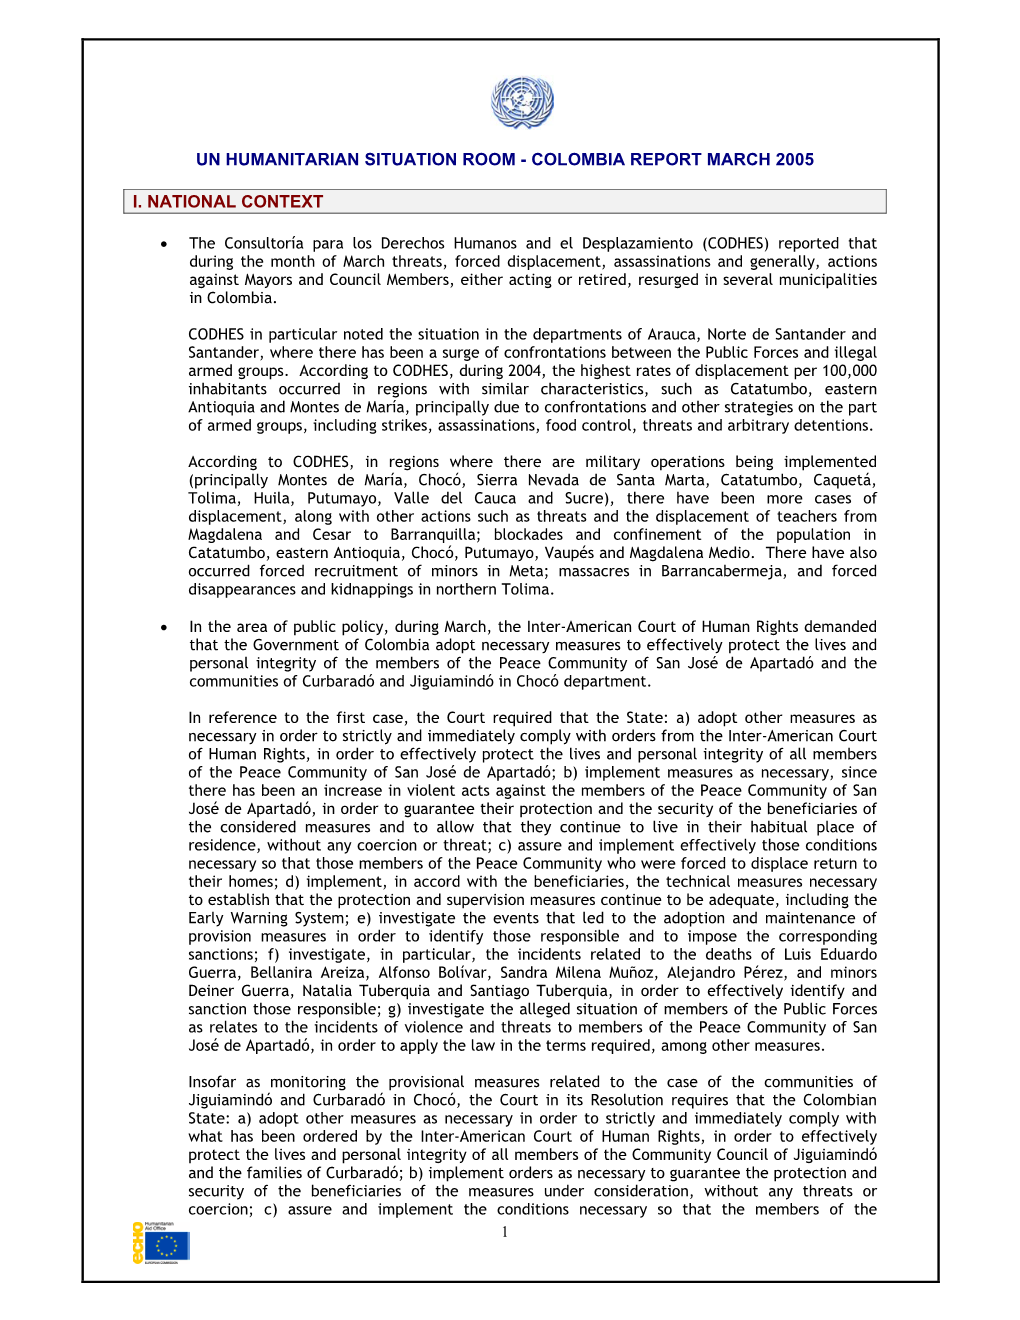 Un Humanitarian Situation Room - Colombia Report March 2005